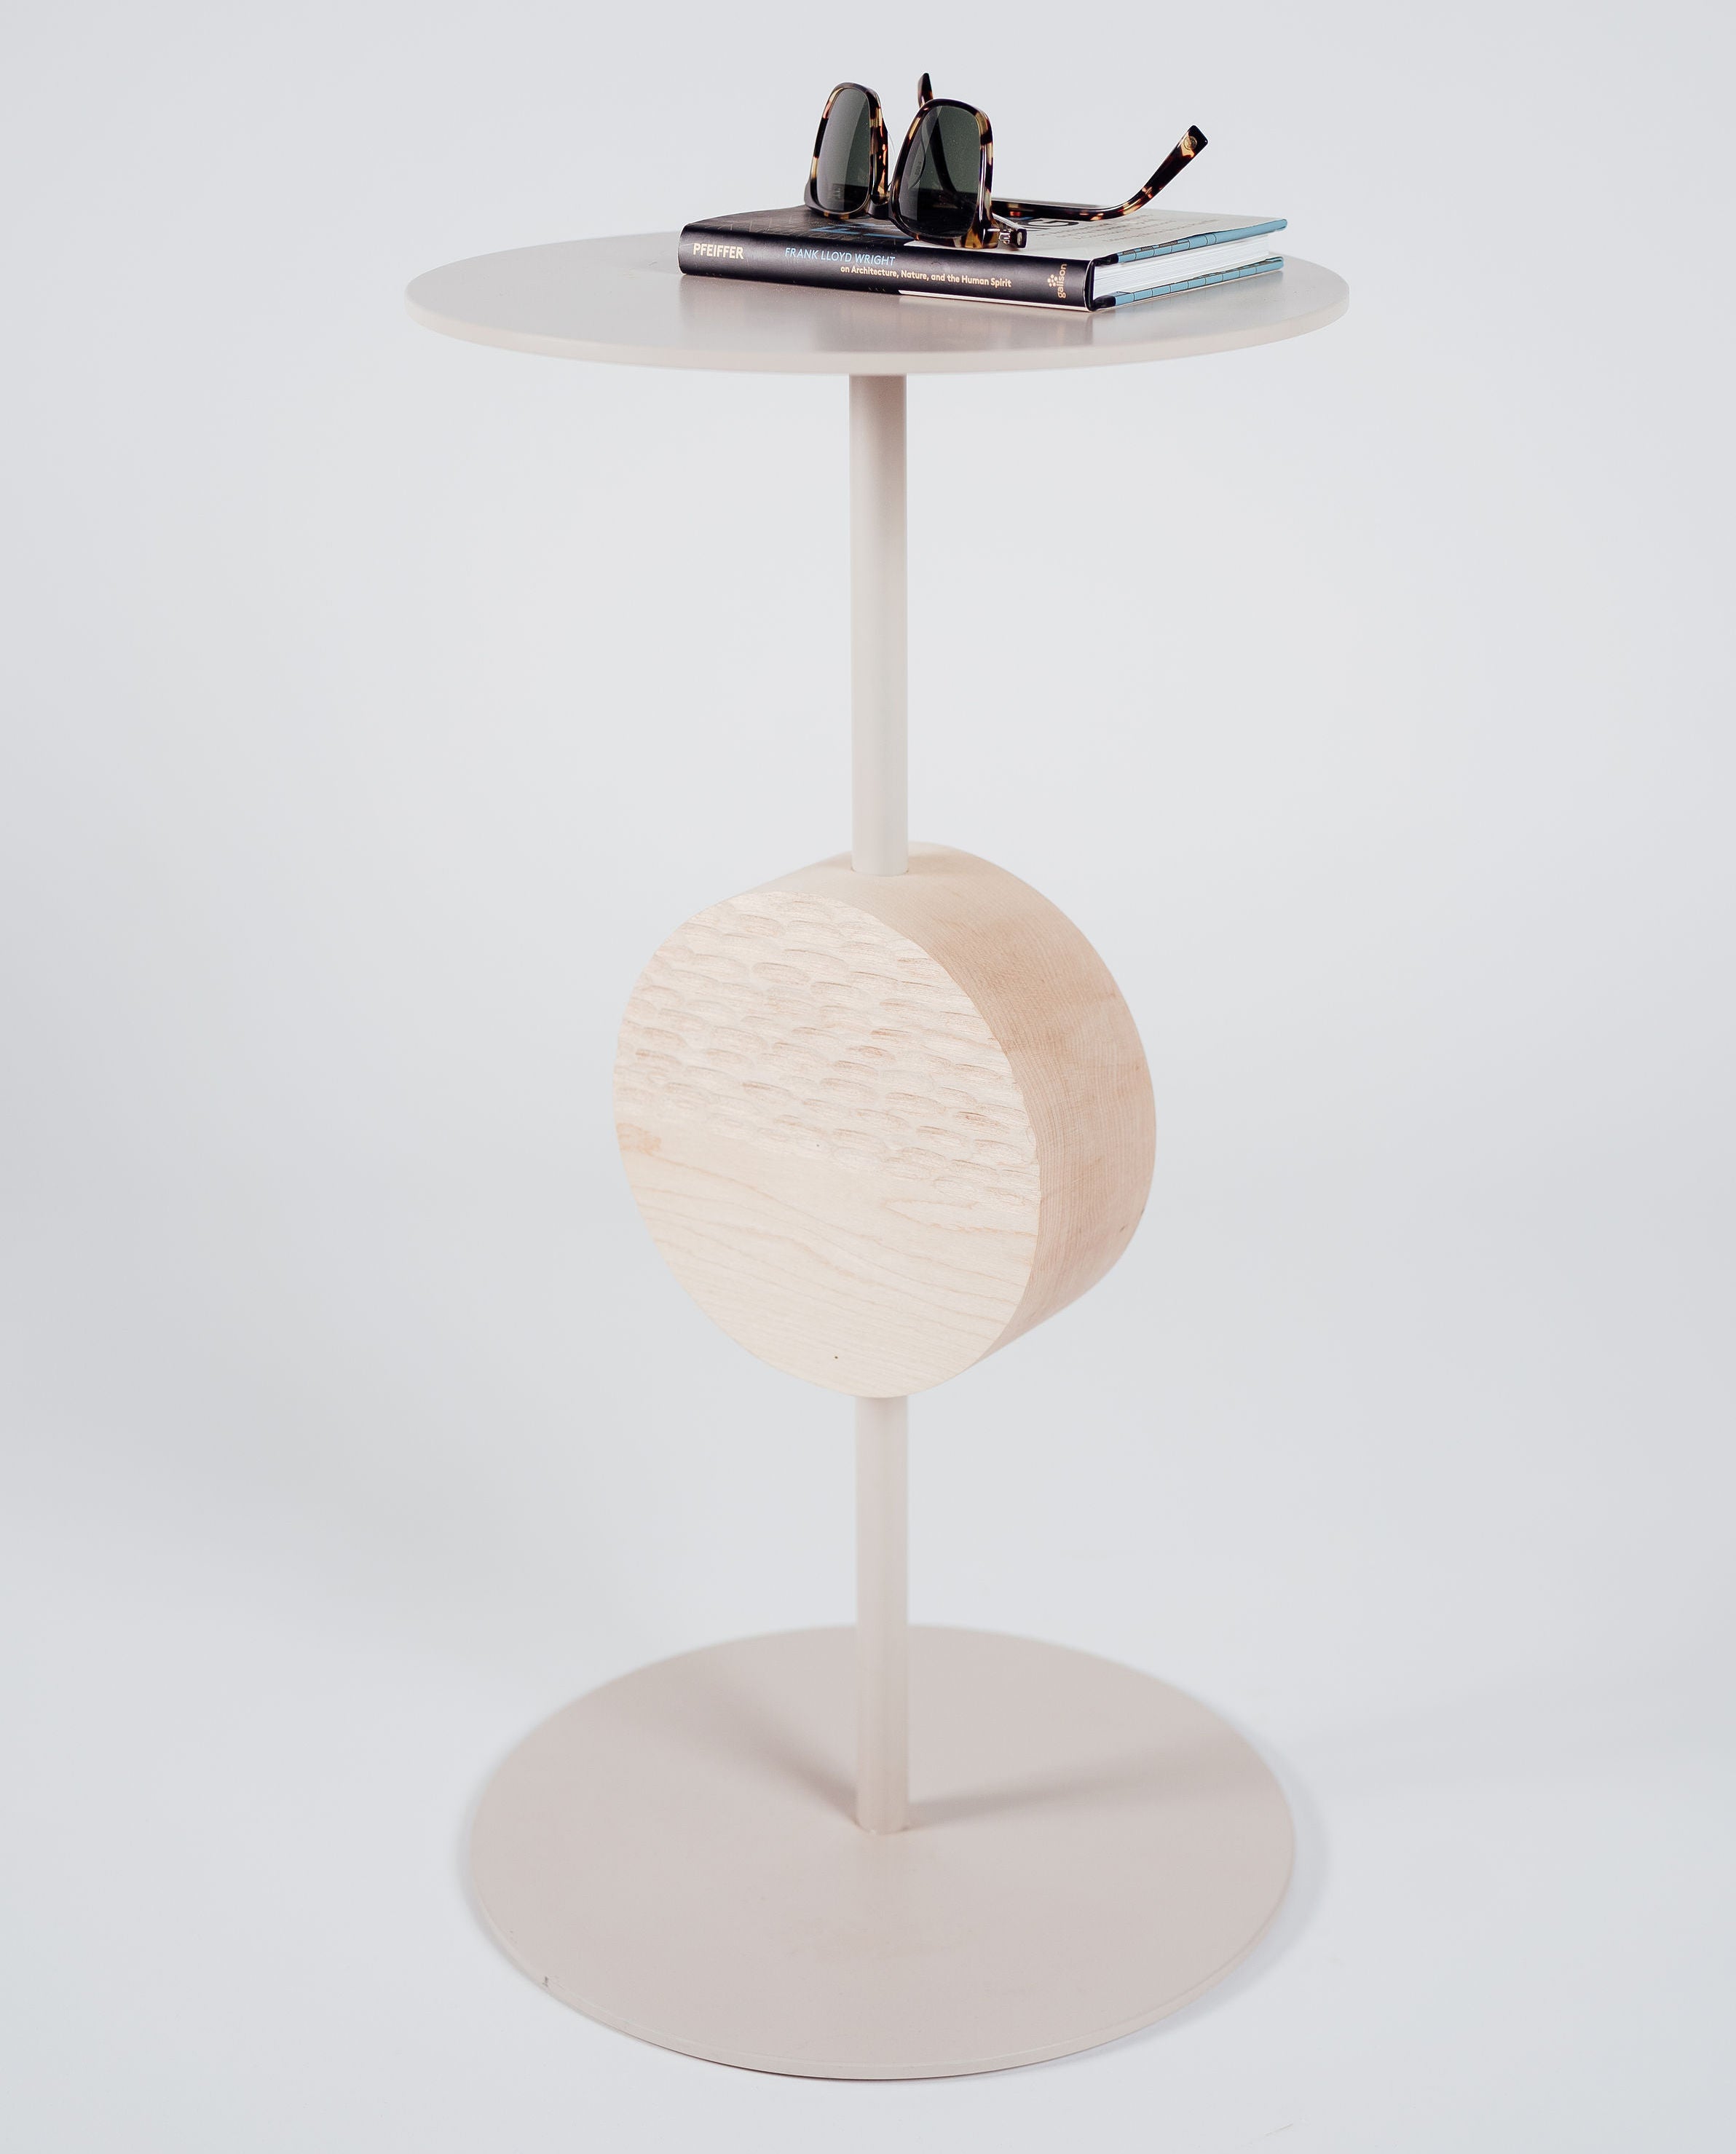 Enoki midcentury modern maple and steel side table handcrafted by Hunt & Noyer in Michigan